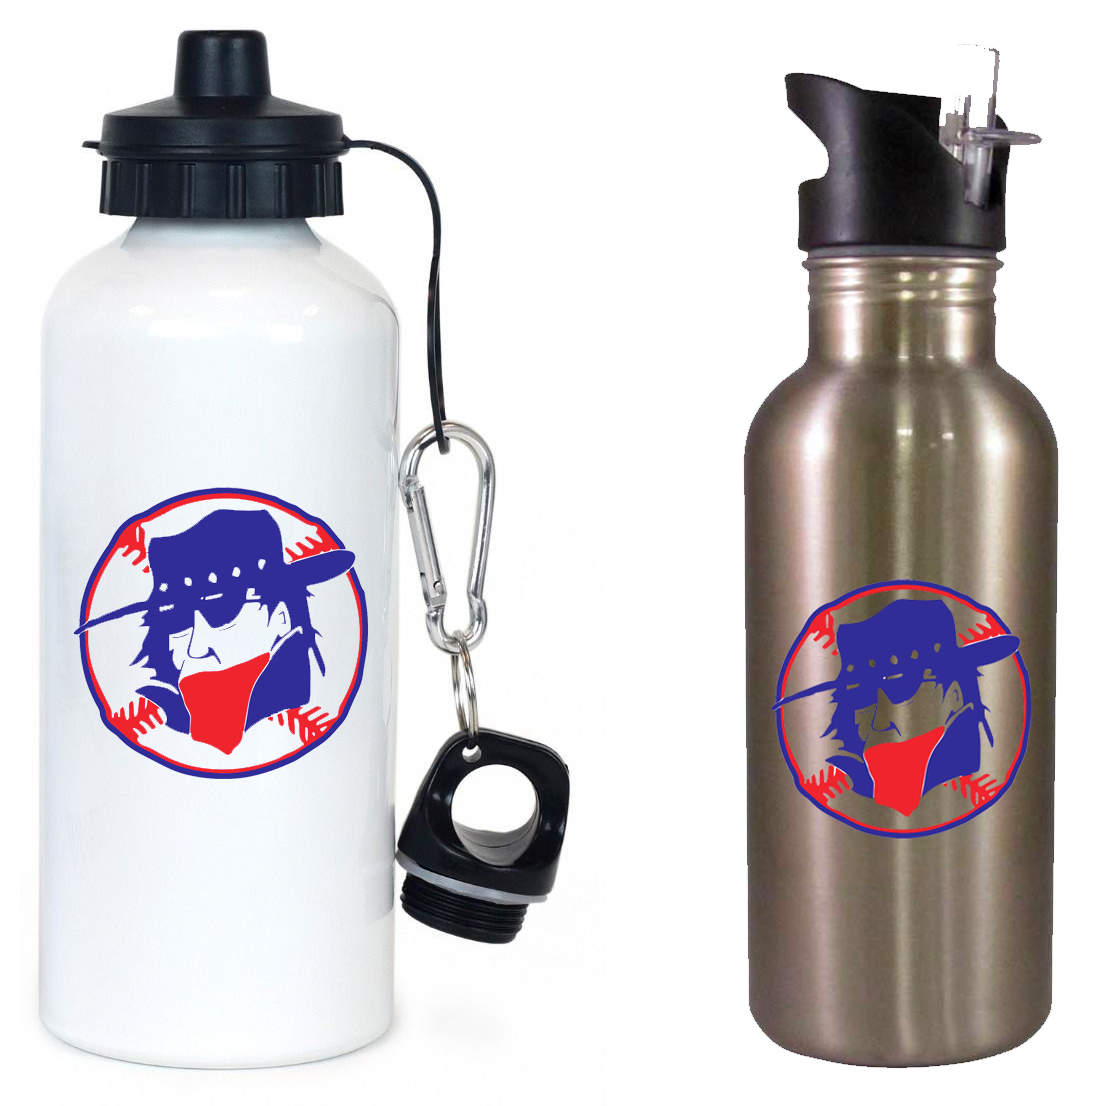 Southern Indiana Outlaws Baseball Team Water Bottle